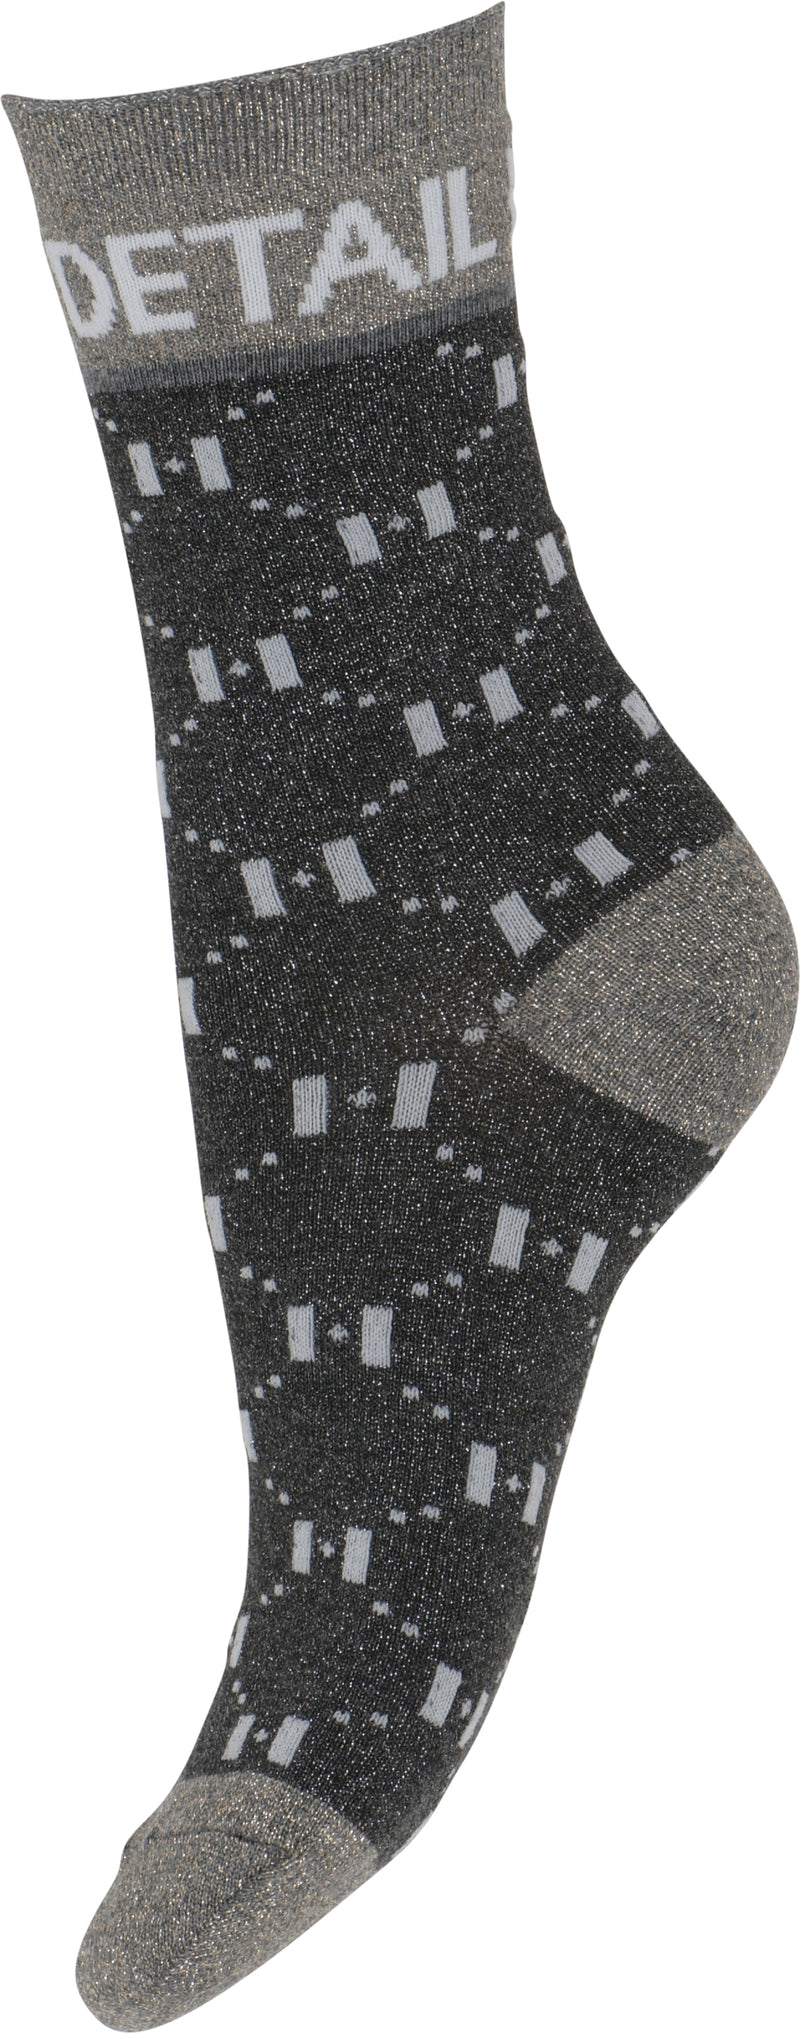 HYPE THE DETAIL - FASHION SOCK - 3-21463-75-9070